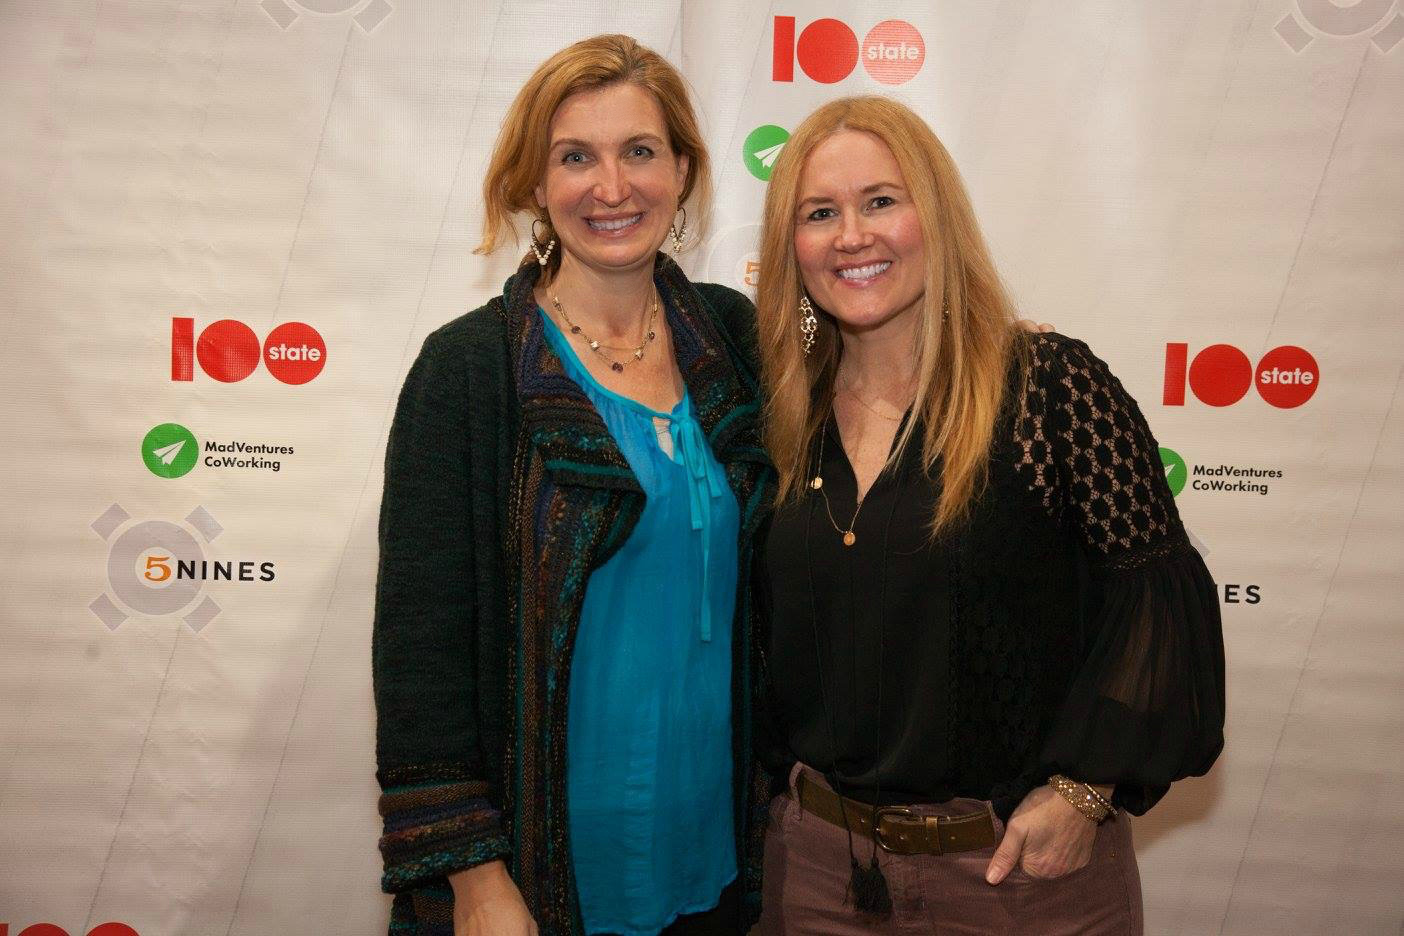  Corinne Neil and Megan Boswell, at the annual party for 100STATE Coworking, at Madison Museum of Contemporary Art. 